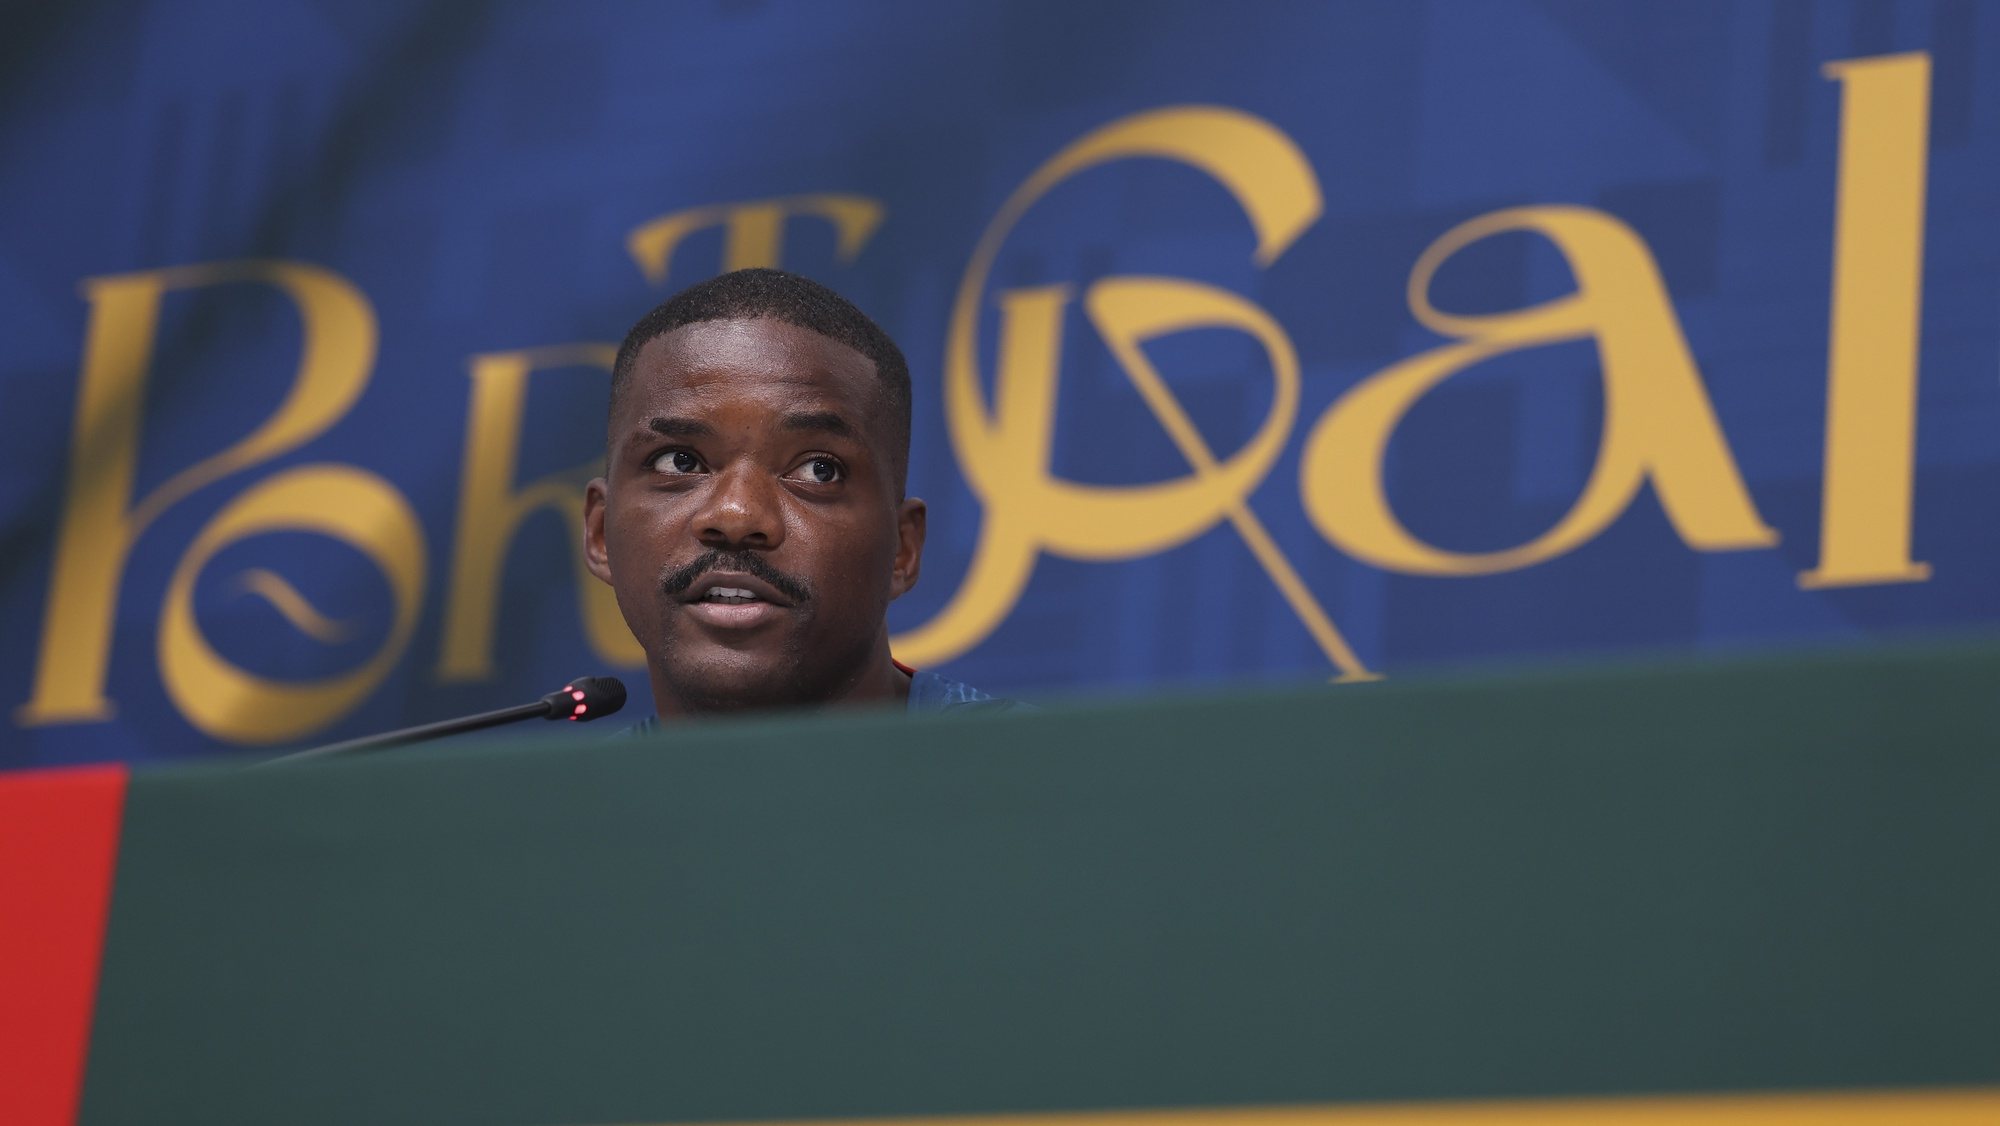 Portugal National team player William Carvalho during a press conference in Al-Shahaniya, Qatar, 04 December 2022. The FIFA World Cup 2022 takes place in Qatar from 20 November until 18 December 2022. JOSE SENA GOULAO/LUSA